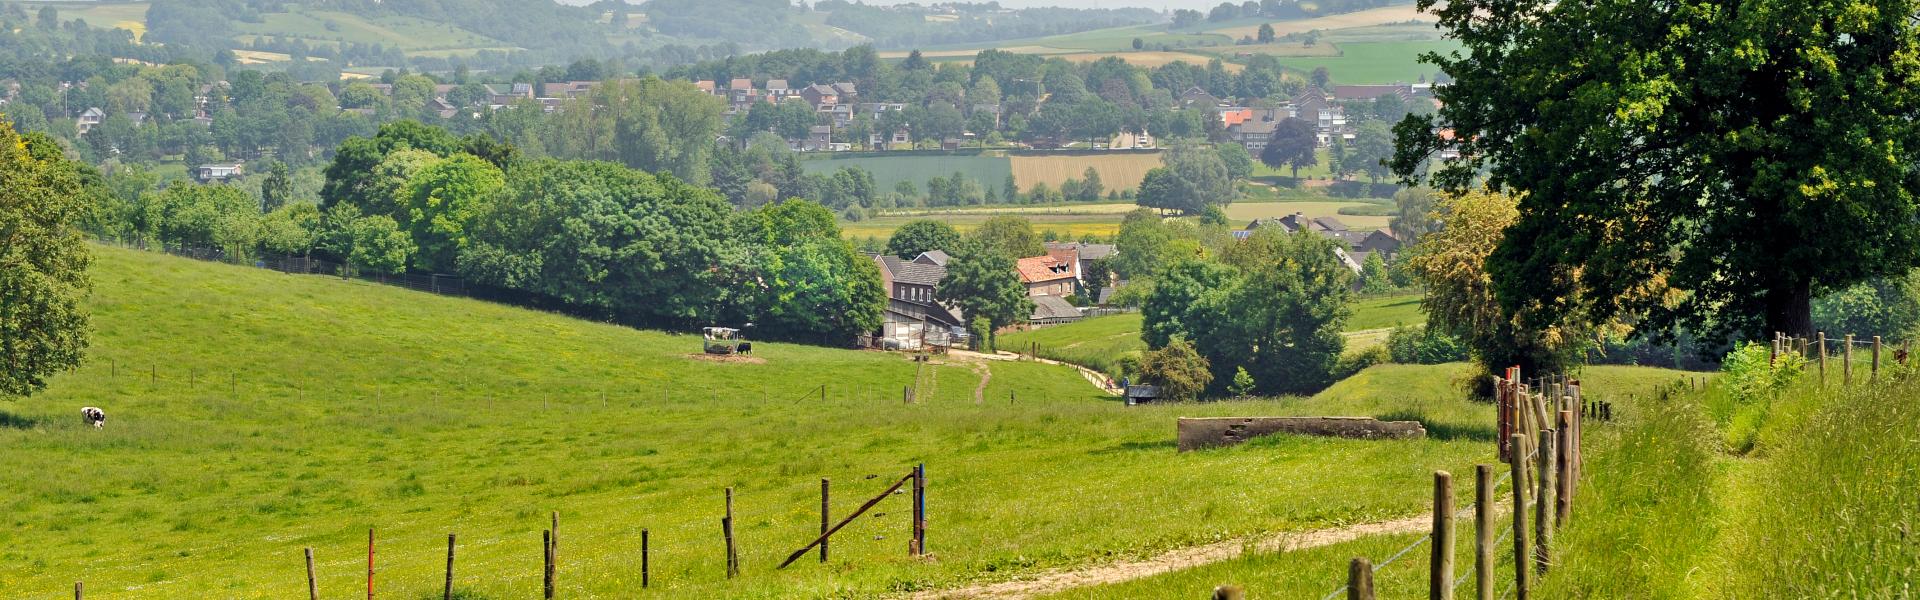 Find the perfect vacation home in the Limburg province - Casamundo